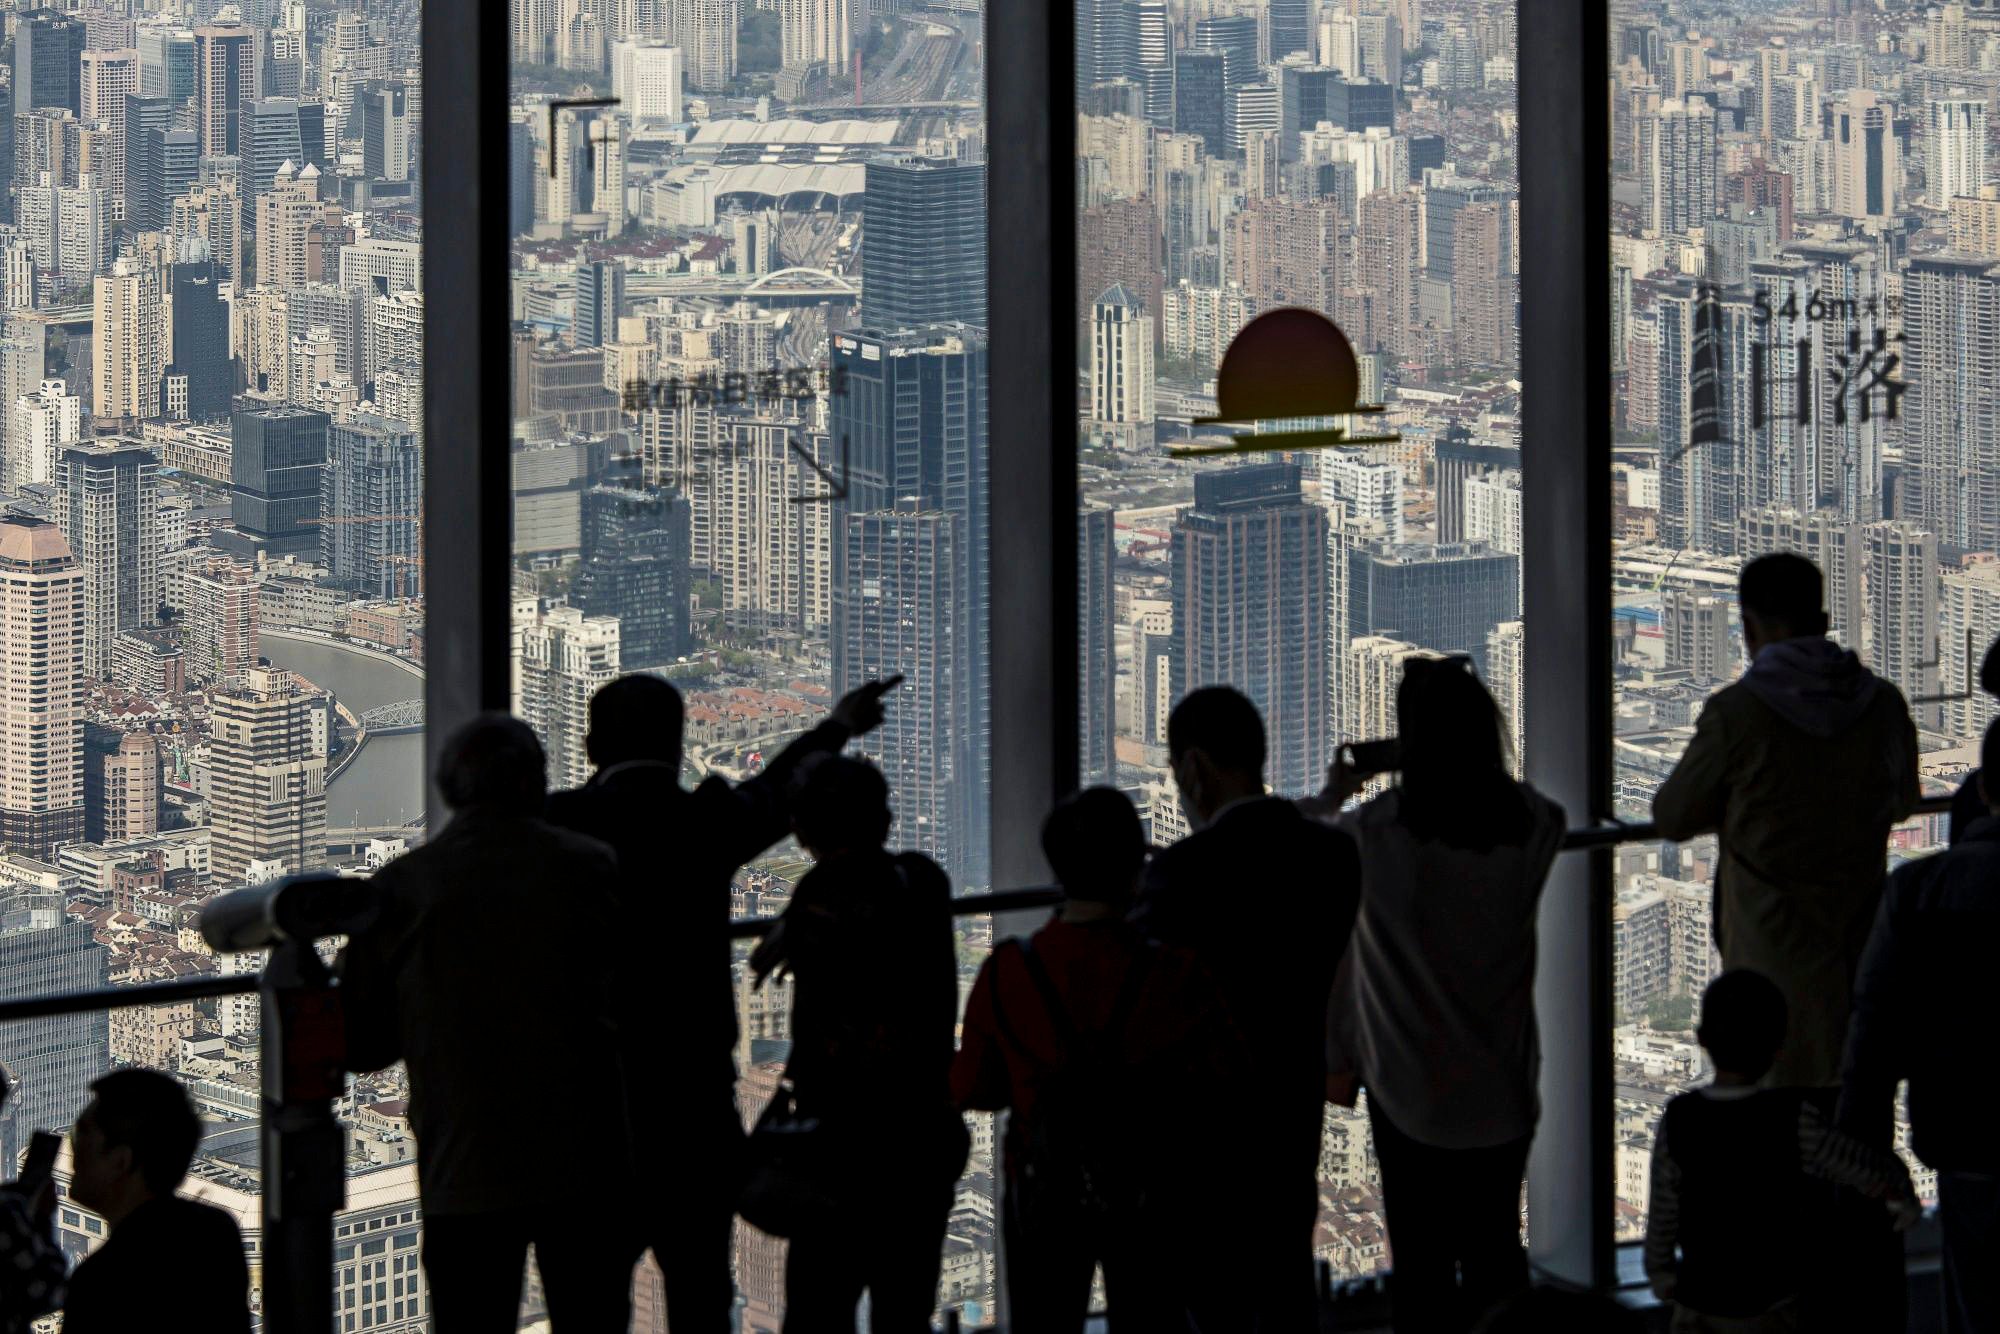 Visitors take in the view from the observation deck at Shanghai Tower. Home sales have been strong in the Greater Bay Area, the Yangtze River Delta area and the Beijing-Tianjin-Hebei region, thanks to demand in tier-1 cities such as Shanghai and Shenzhen. Photo: Bloomberg